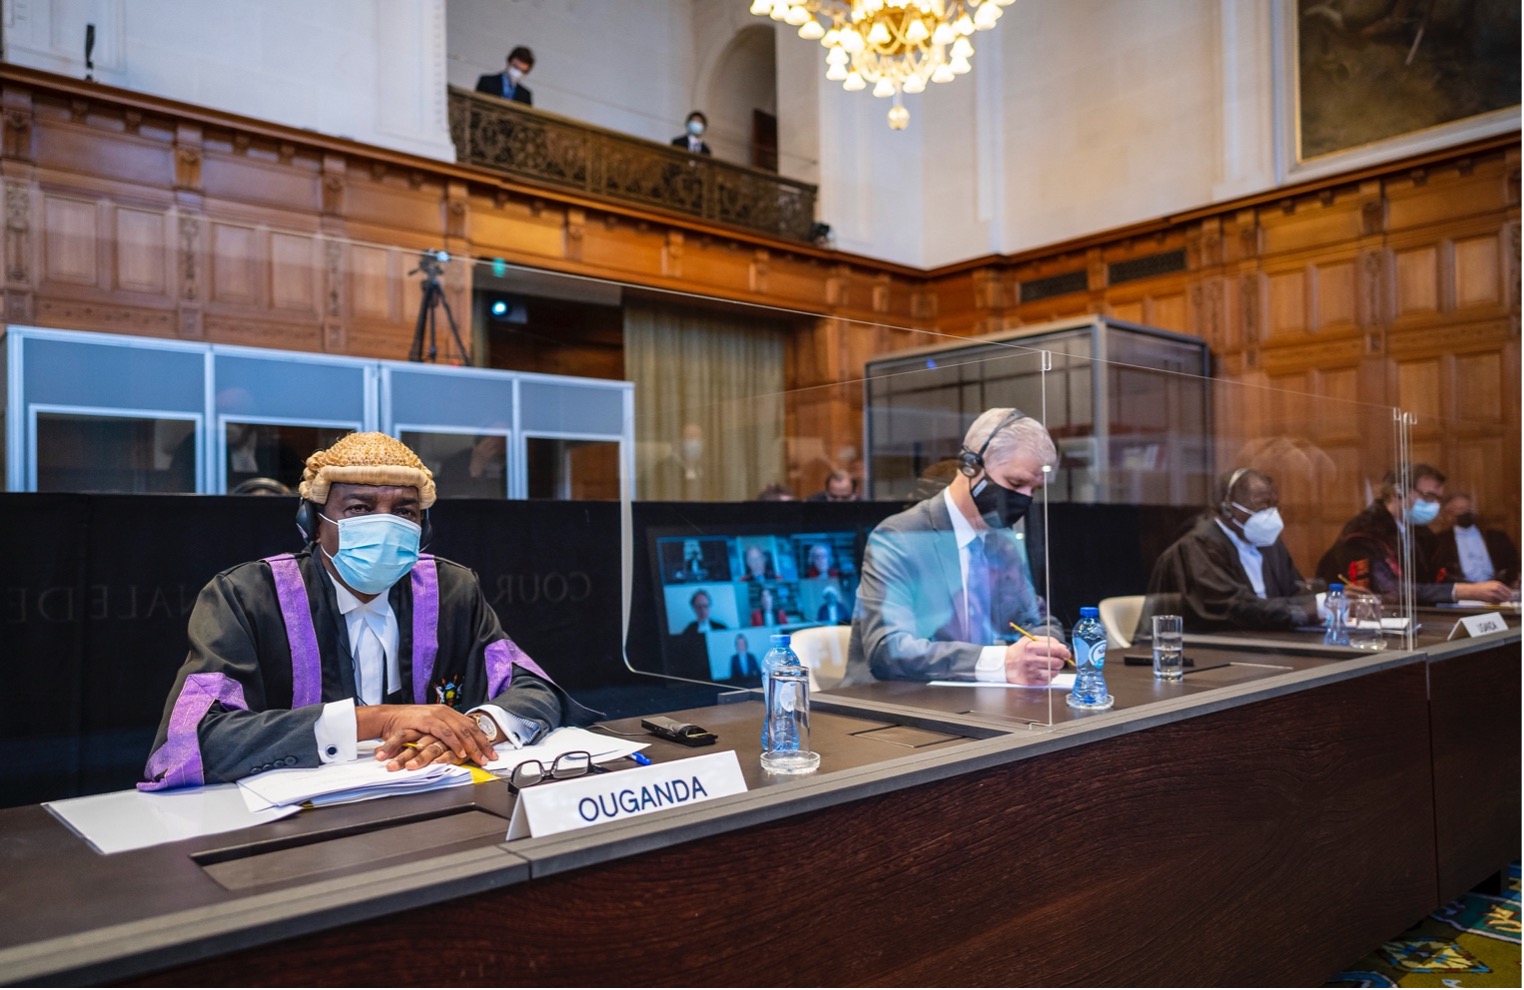 Digital Transformation Helps the International Court of Justice Optimize and Secure its Mission